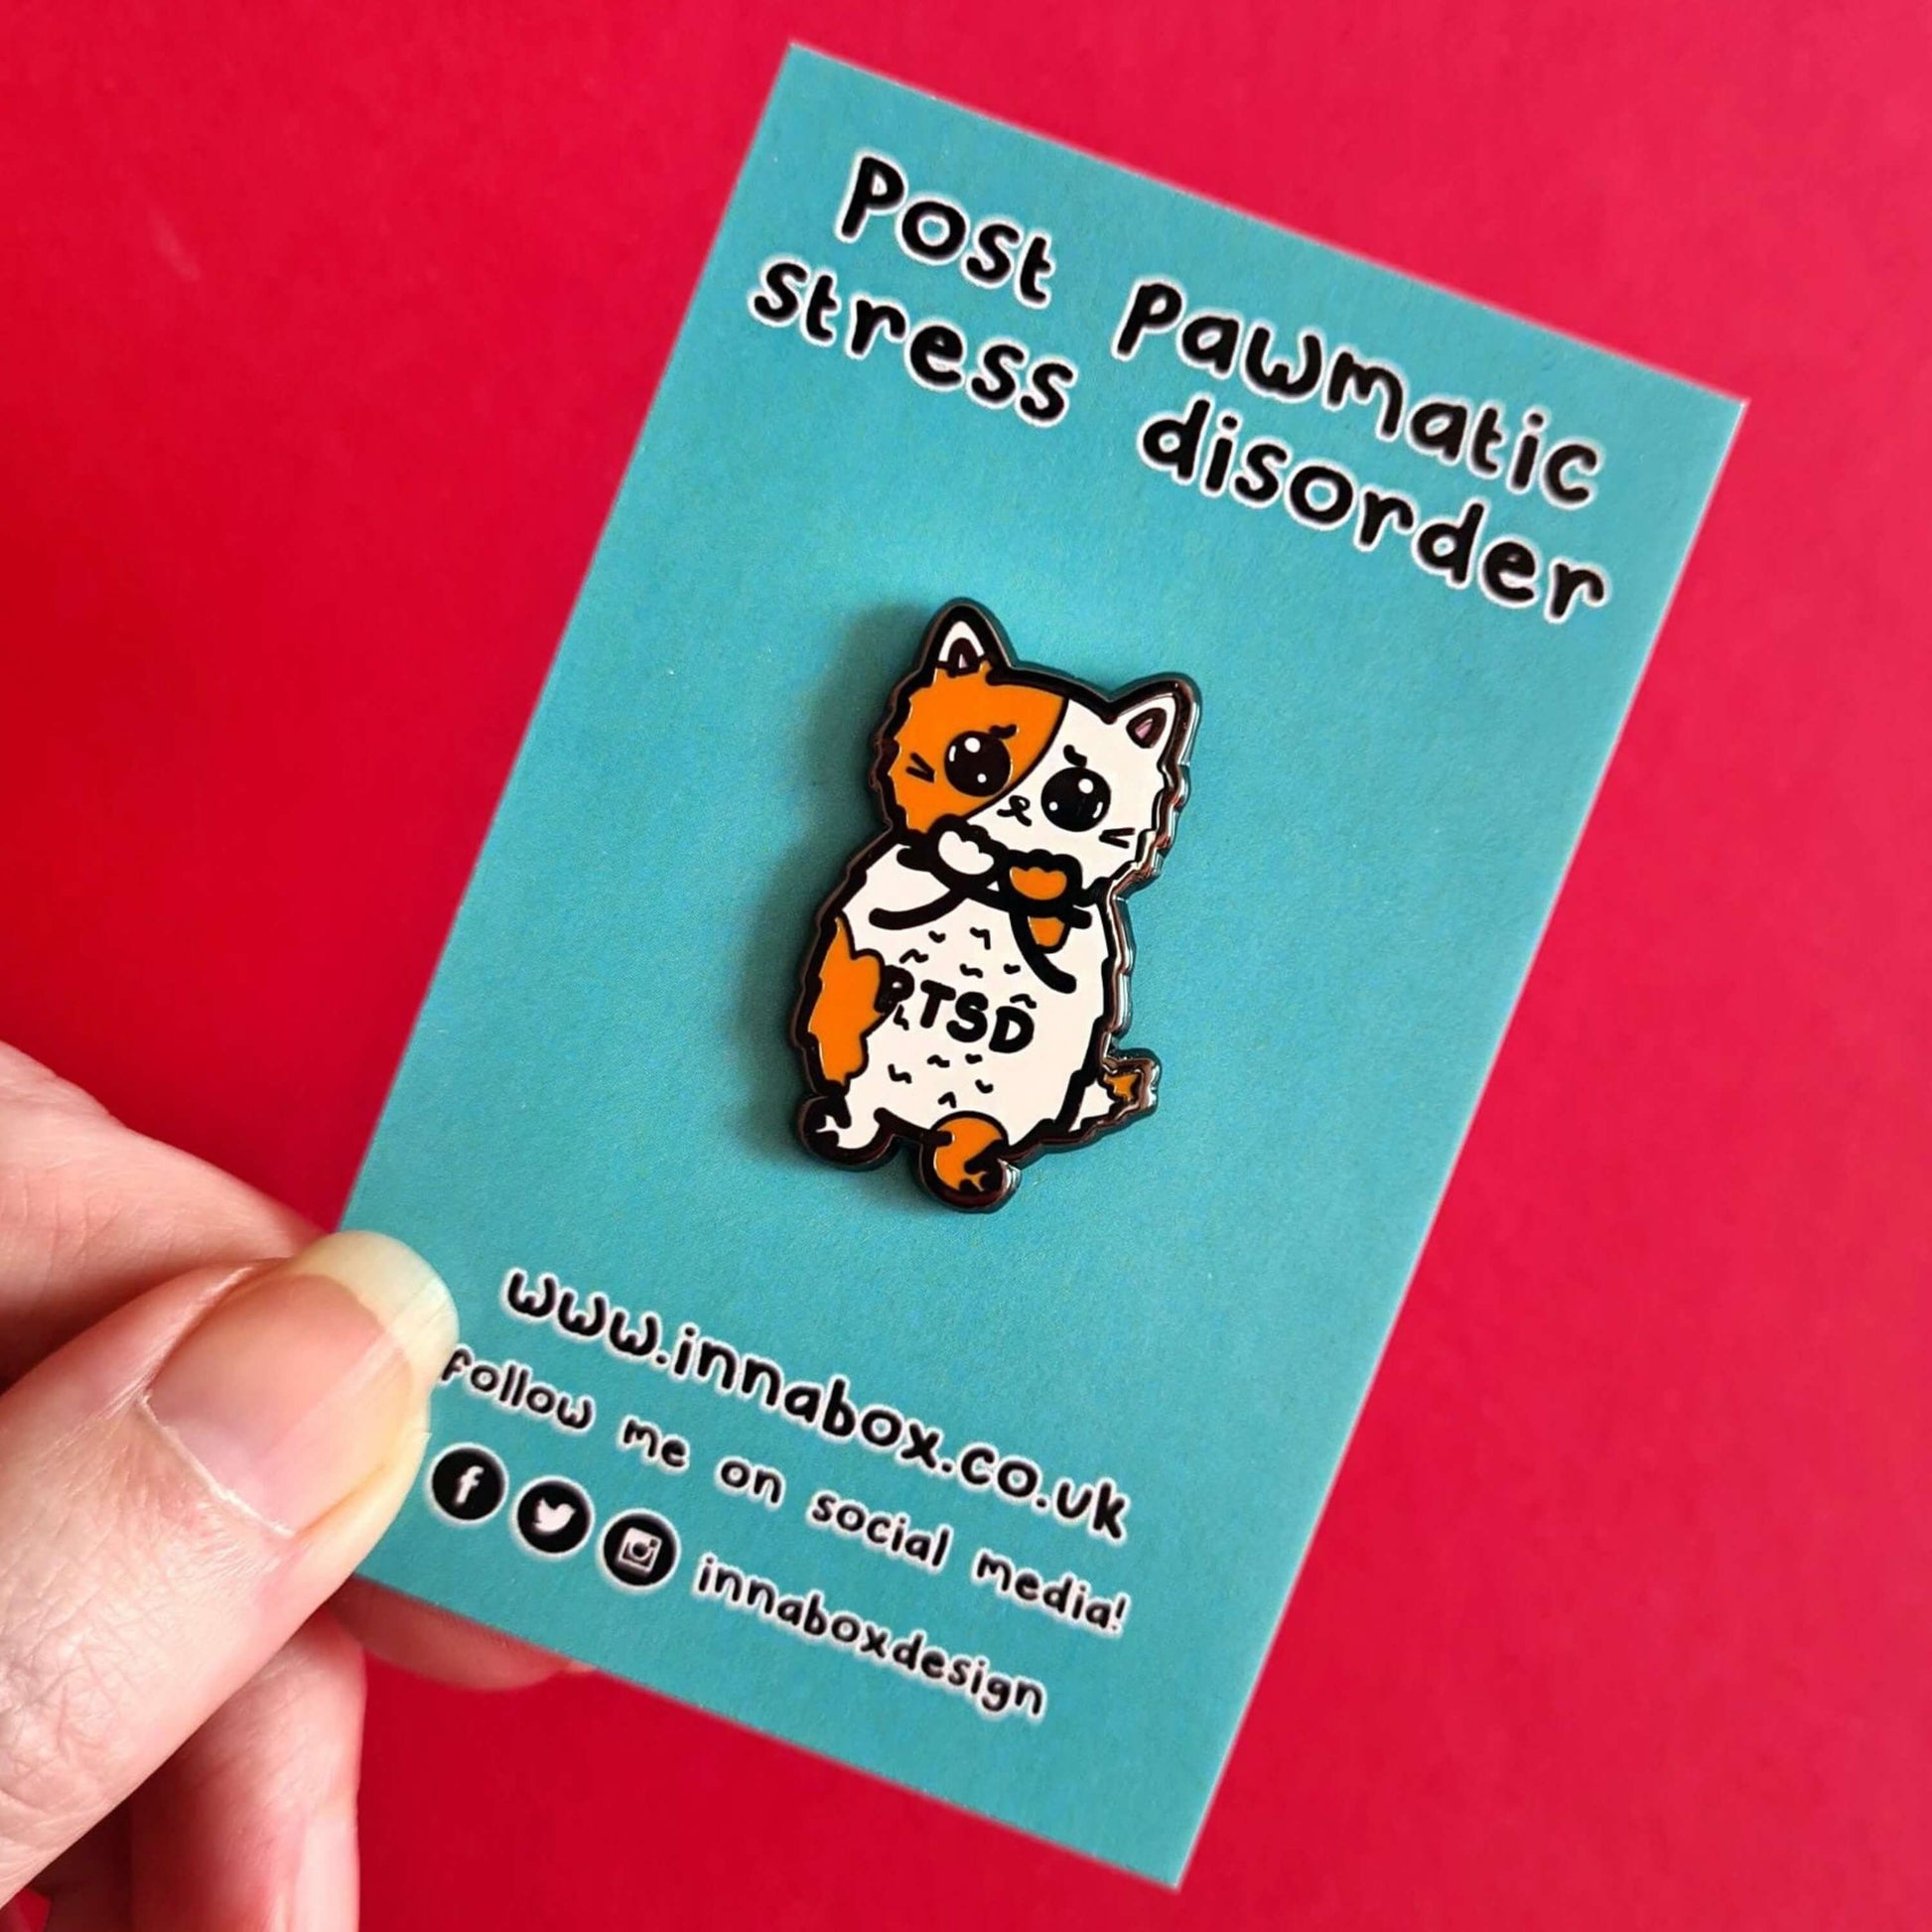 The PTSD Cat Enamel Pin - Post-Traumatic Stress Disorder on blue backing card with innabox social media handles underneath held over a red background. An orange and white scared cat with black text across its belly reading 'PTSD'. The hand drawn design is raising awareness for post traumatic stress disorder.